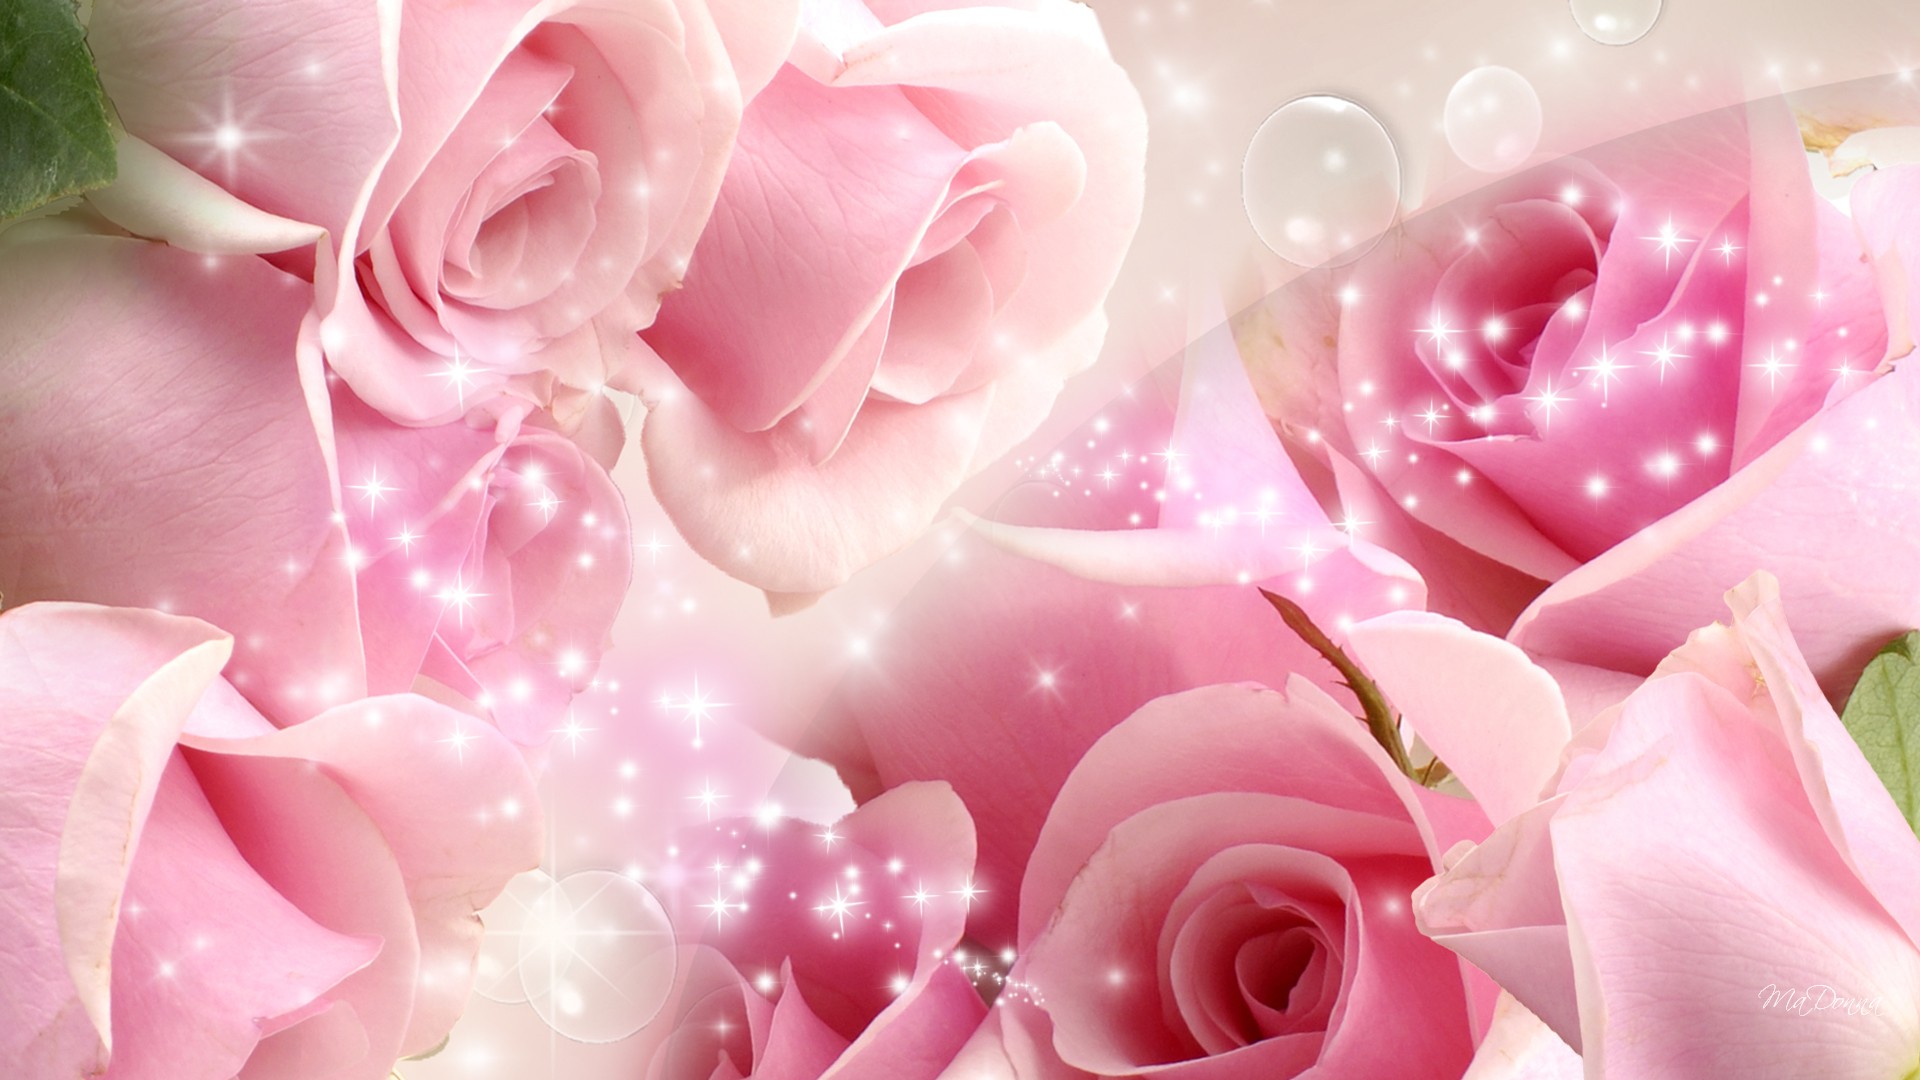 Flower Wallpaper Hd Images Best Of Love And Warmth - Rose Pink Flower  Background Hd - 1024x576 Wallpaper 